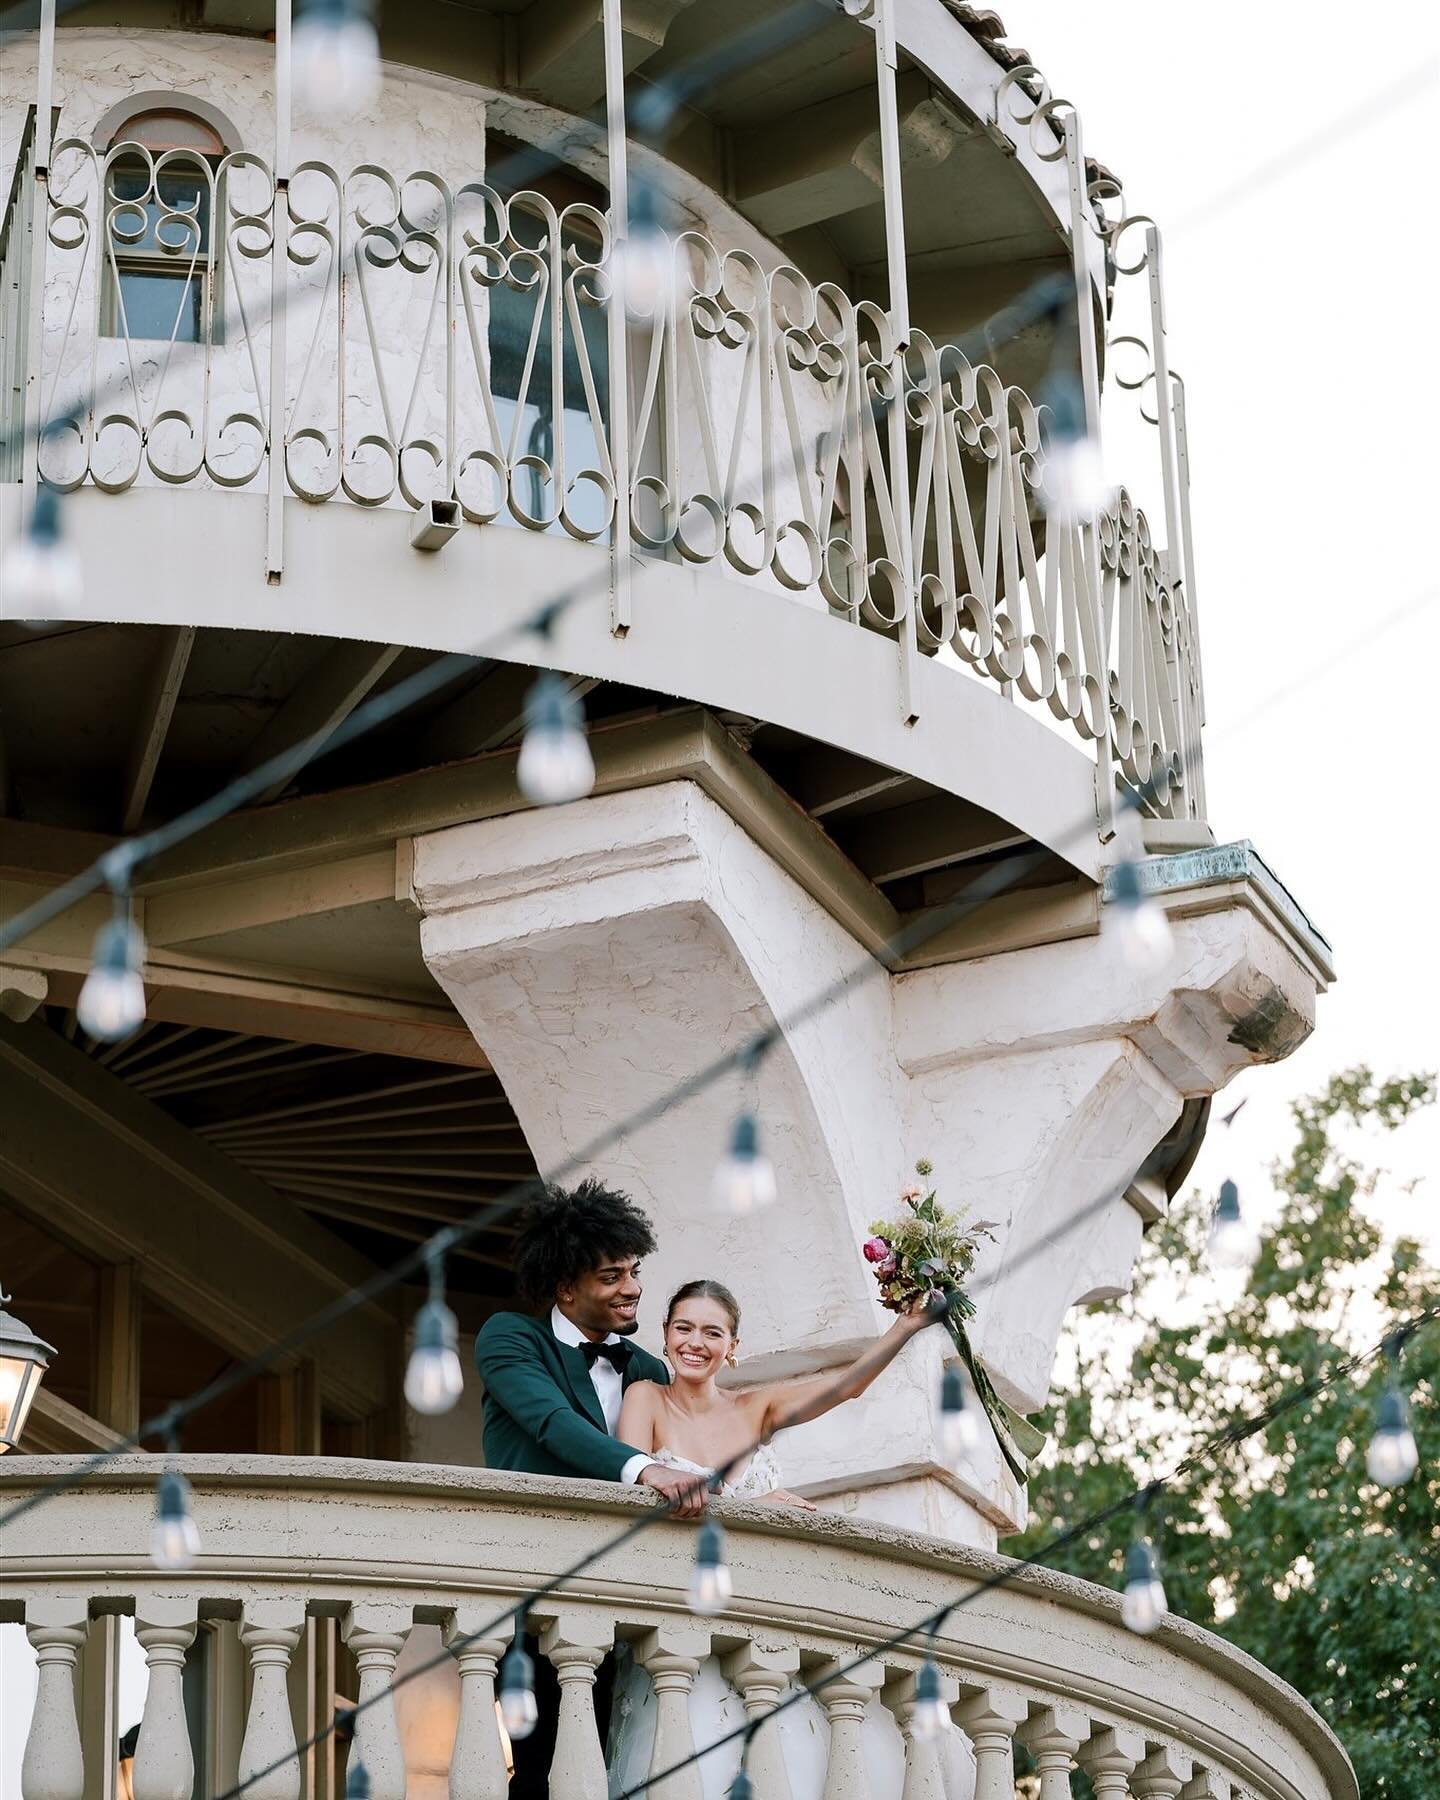 Sparkler exits are out, waiving farewell to your guests from a European balcony is IN ❤️

Only kidding, nothing is &ldquo;in&rdquo; or &ldquo;out&rdquo;, do what you love! But waiving goodbye from a tall tower is a princess dream I can get behind 😍
